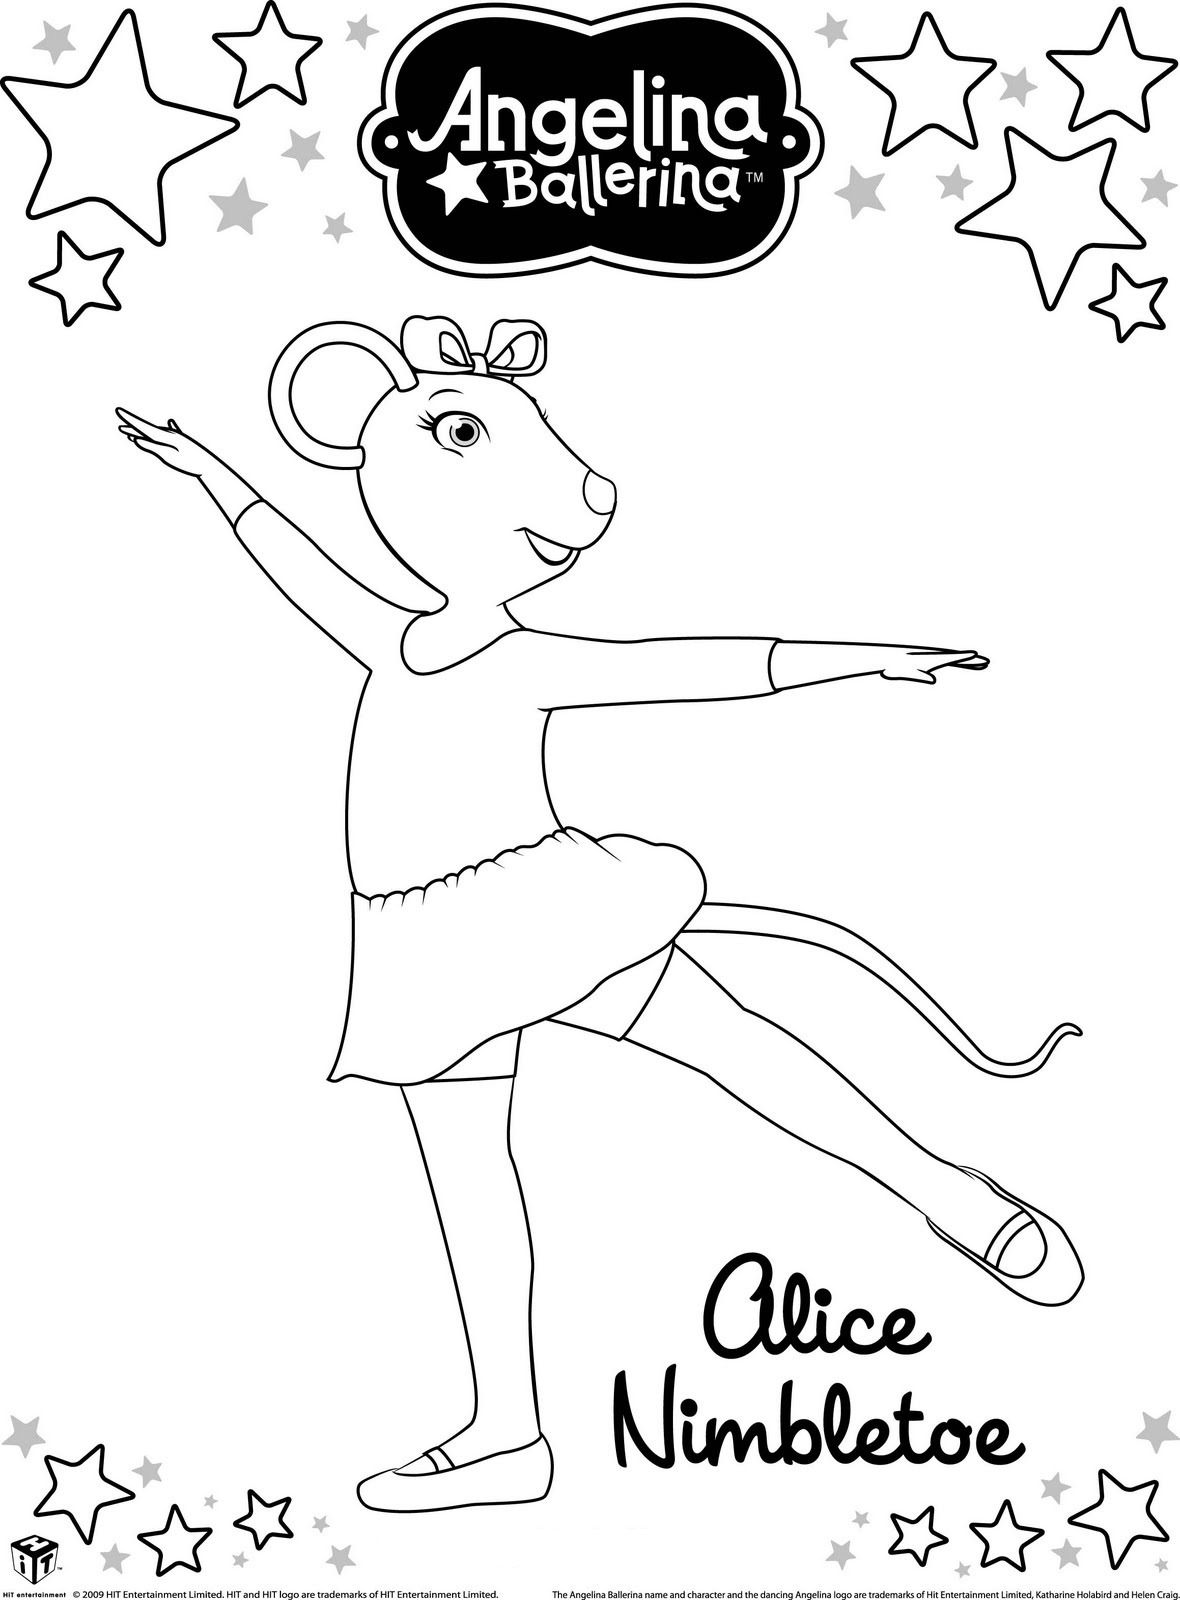 Printable Angelina Ballerina Coloring Pages Pdf - Angelina Ballerina Coloring Pagse Alice